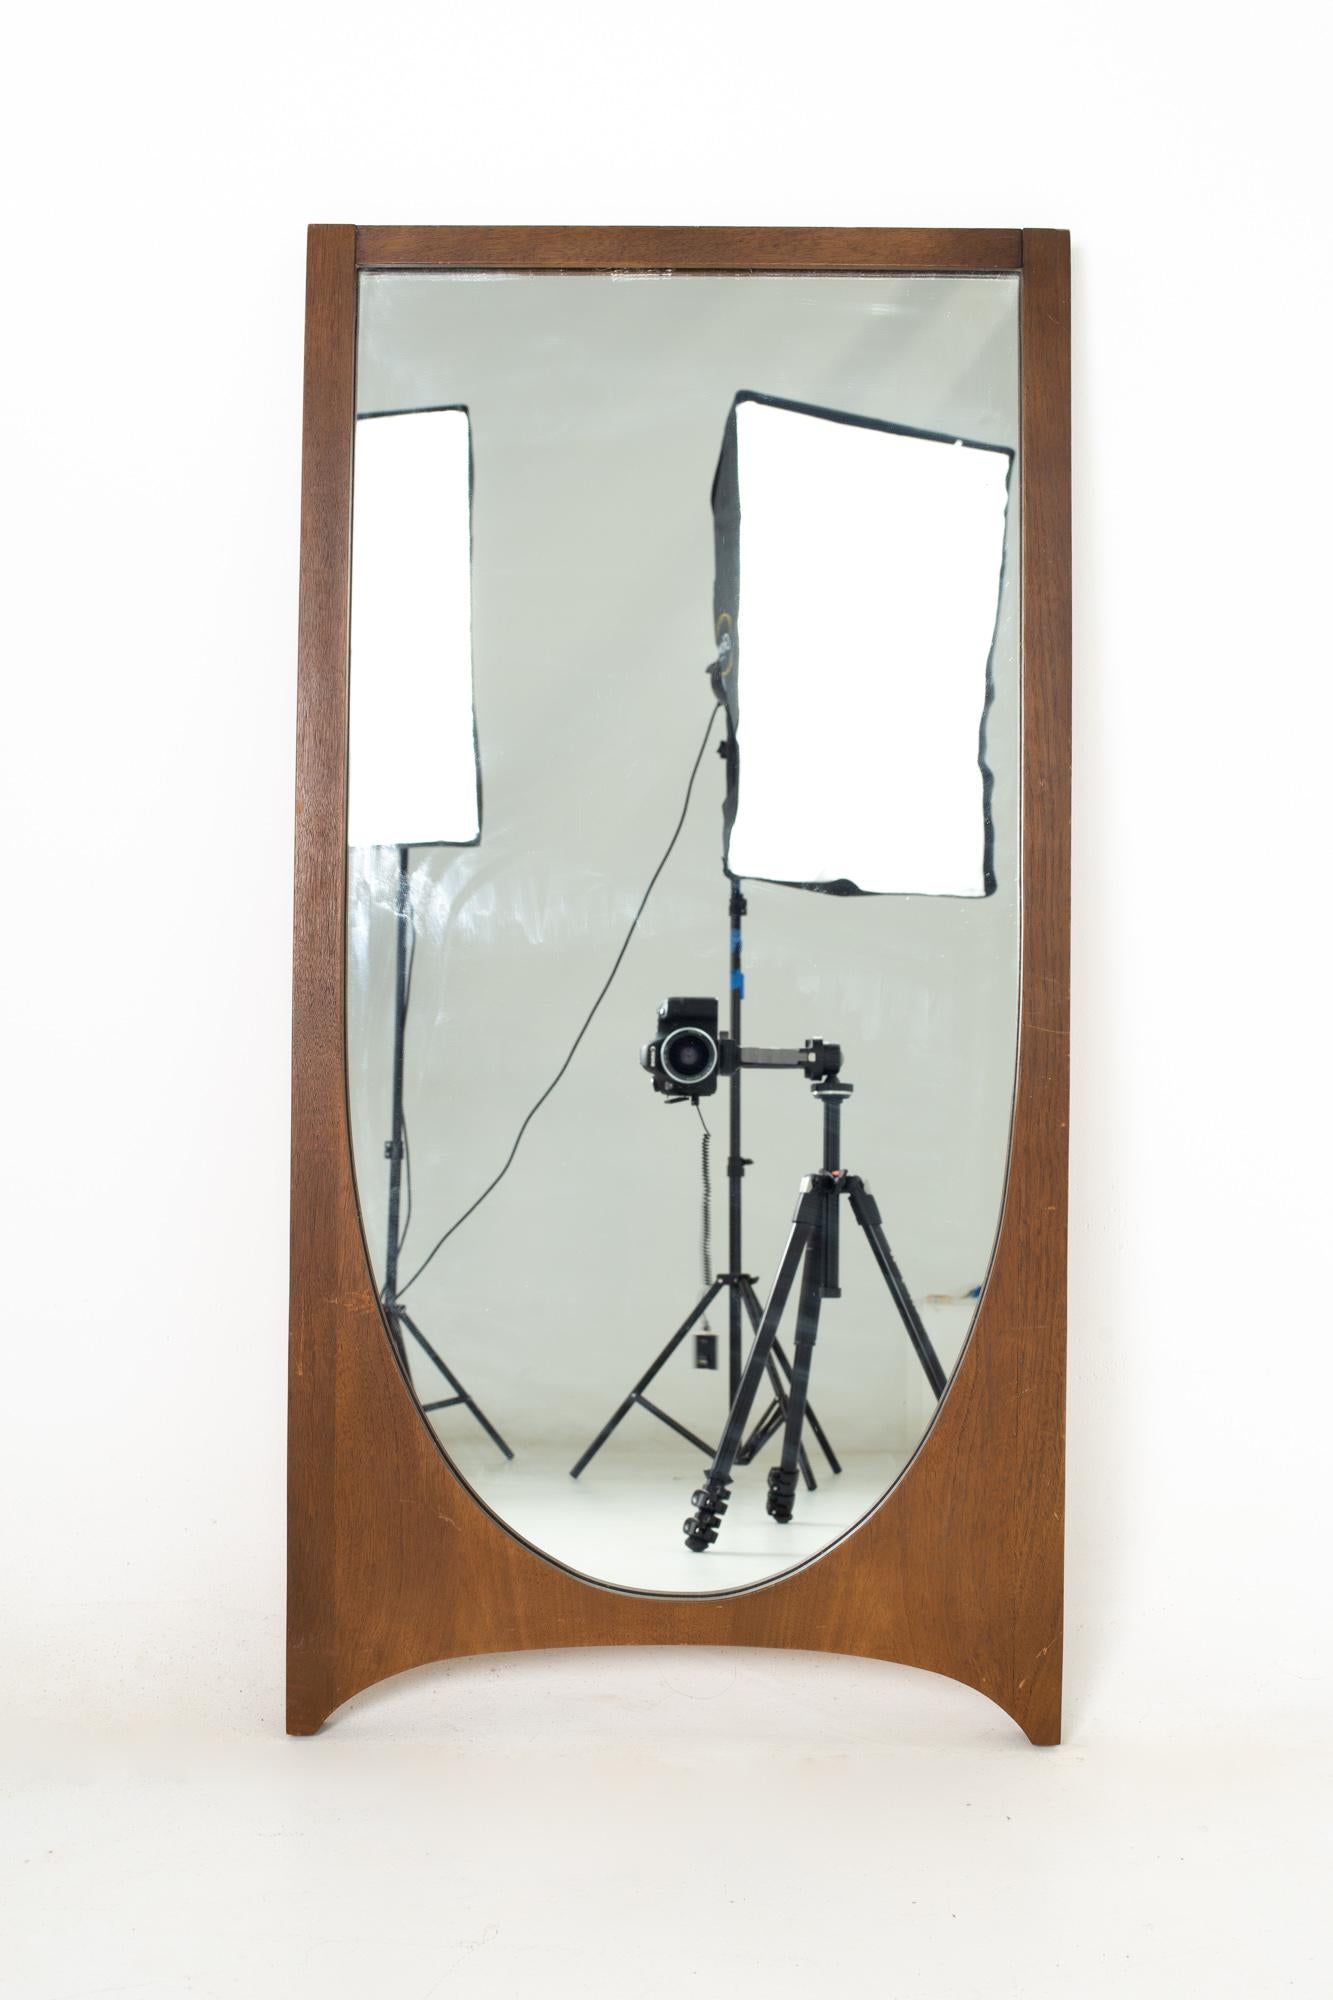 Broyhill Brasilia Mid Century mirror

Mirror measures: 21 wide x 1 deep x 57.5 inches high

?All pieces of furniture can be had in what we call restored vintage condition. That means the piece is restored upon purchase so it’s free of